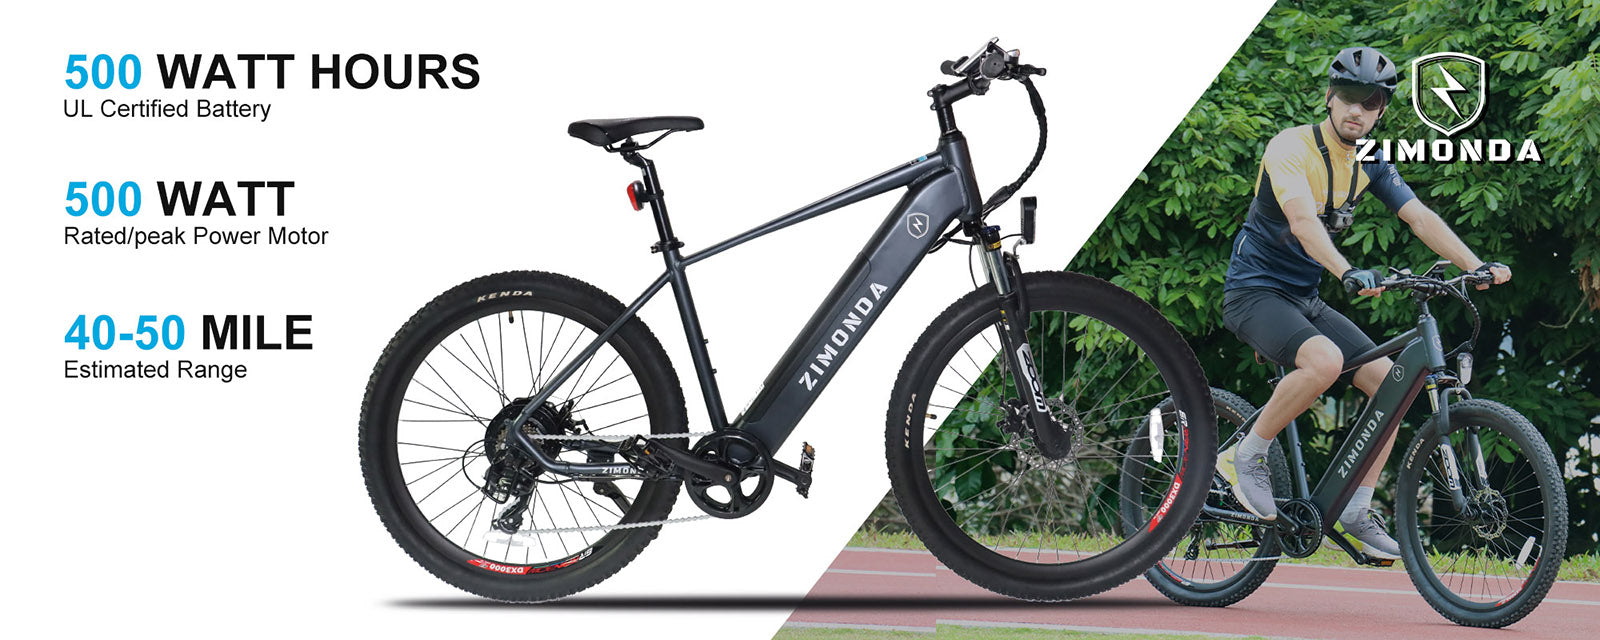 ZIMONDA Electric Mountain Bike for Adults, 27.5” Ebike BAFANG 500W Brushless Motor, Removable 48V 10.4Ah Lithium-ion Battery E-Bicycle with Dashboard, Shimano 7 Speed Gears, Zoom Suspension Fork